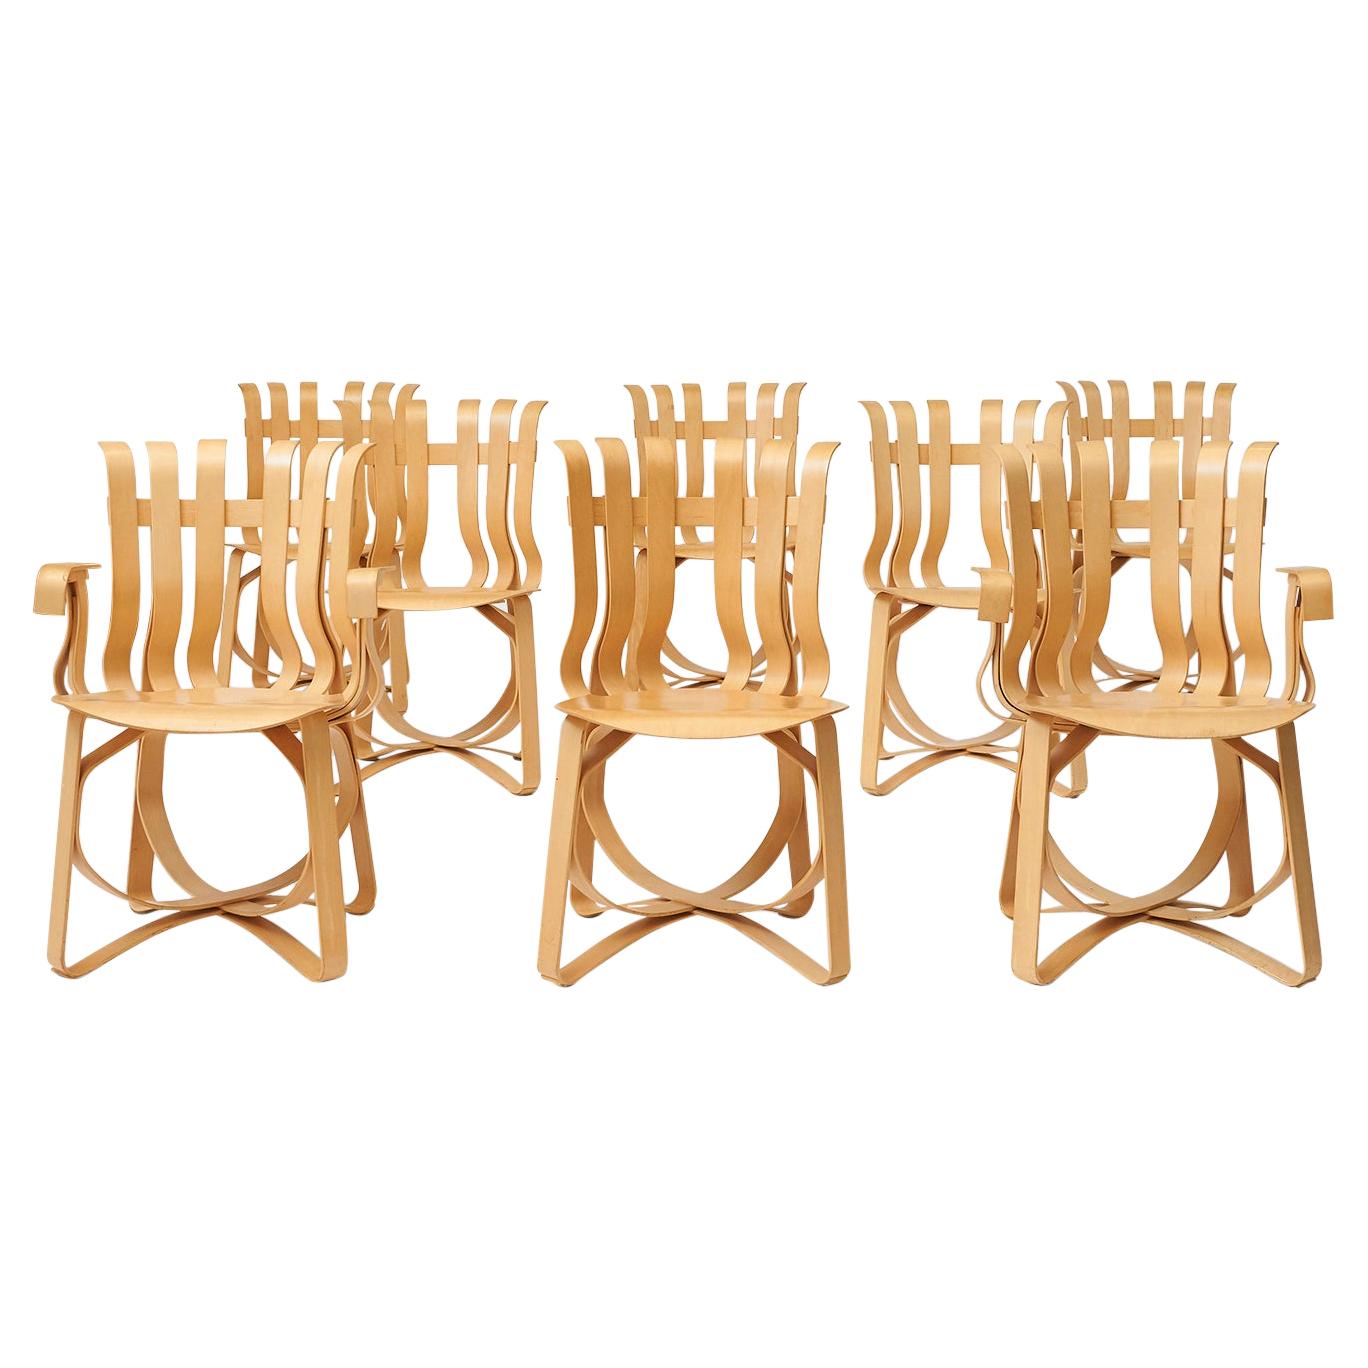 6 Frank Gehry Hat Trick Chairs, in pairs of 2 (Armchairs priced Separately)